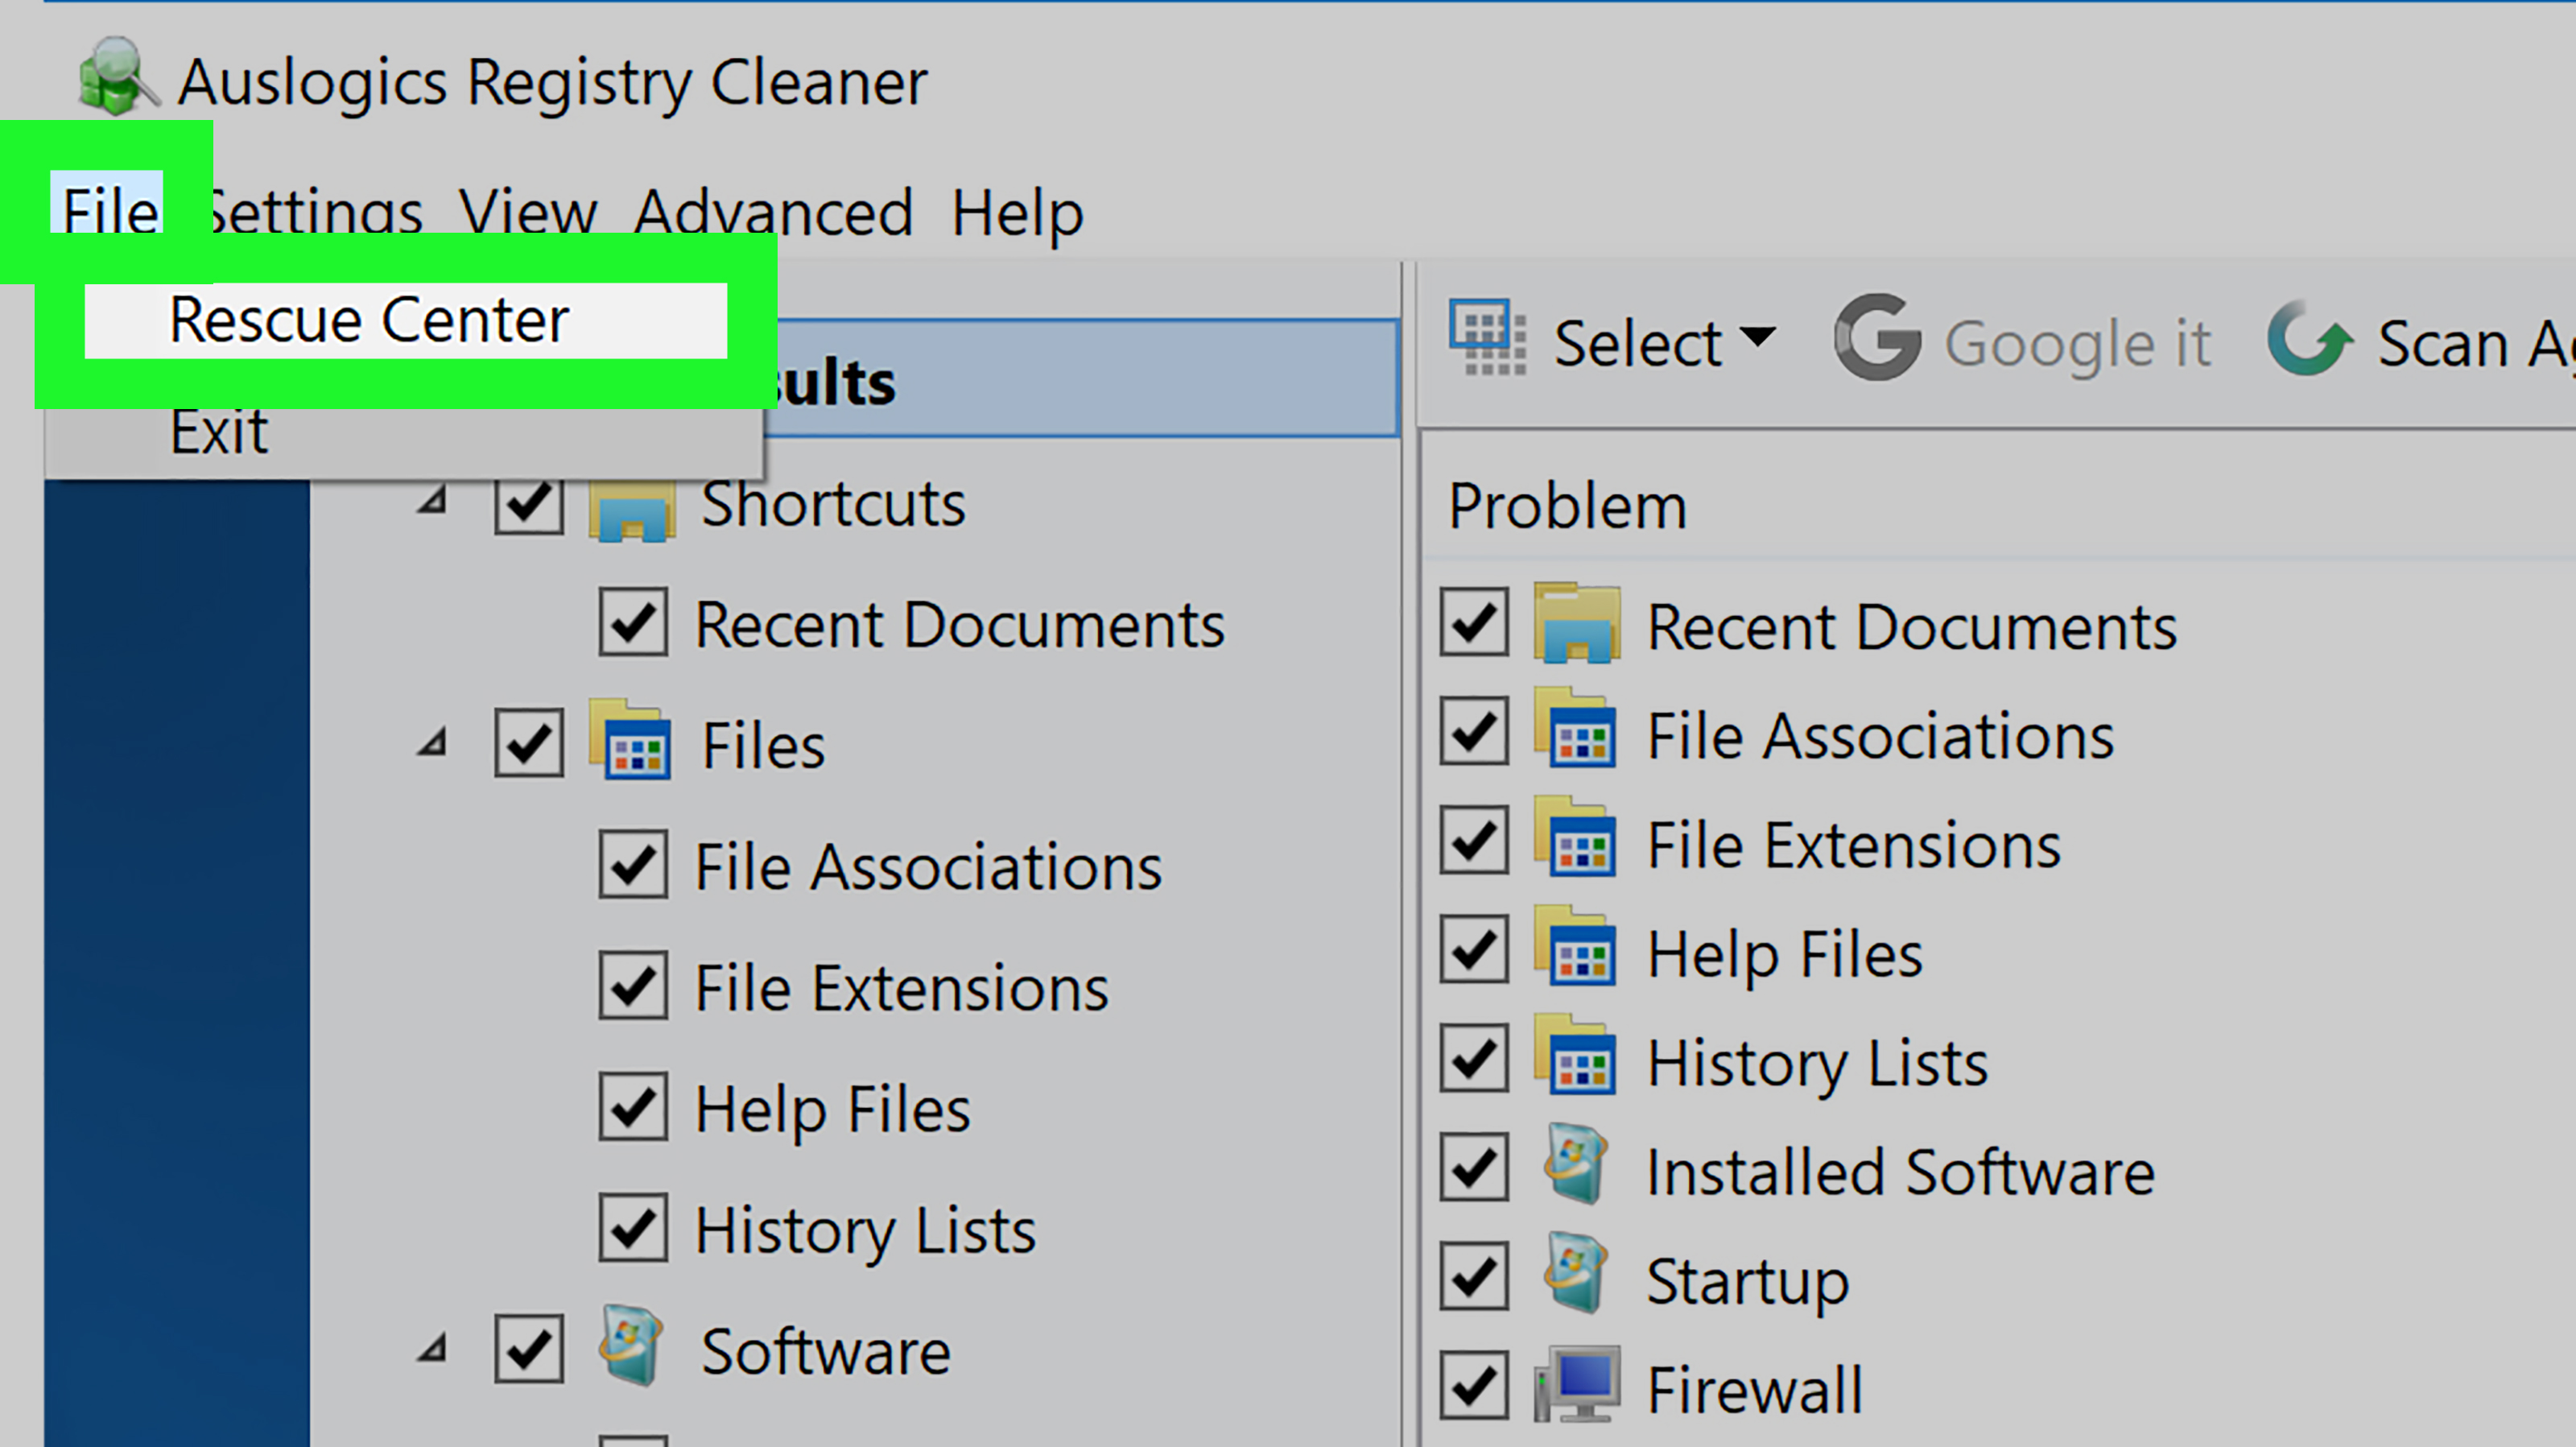 Download and install a reliable registry cleaner
Run the registry cleaner and follow the on-screen instructions